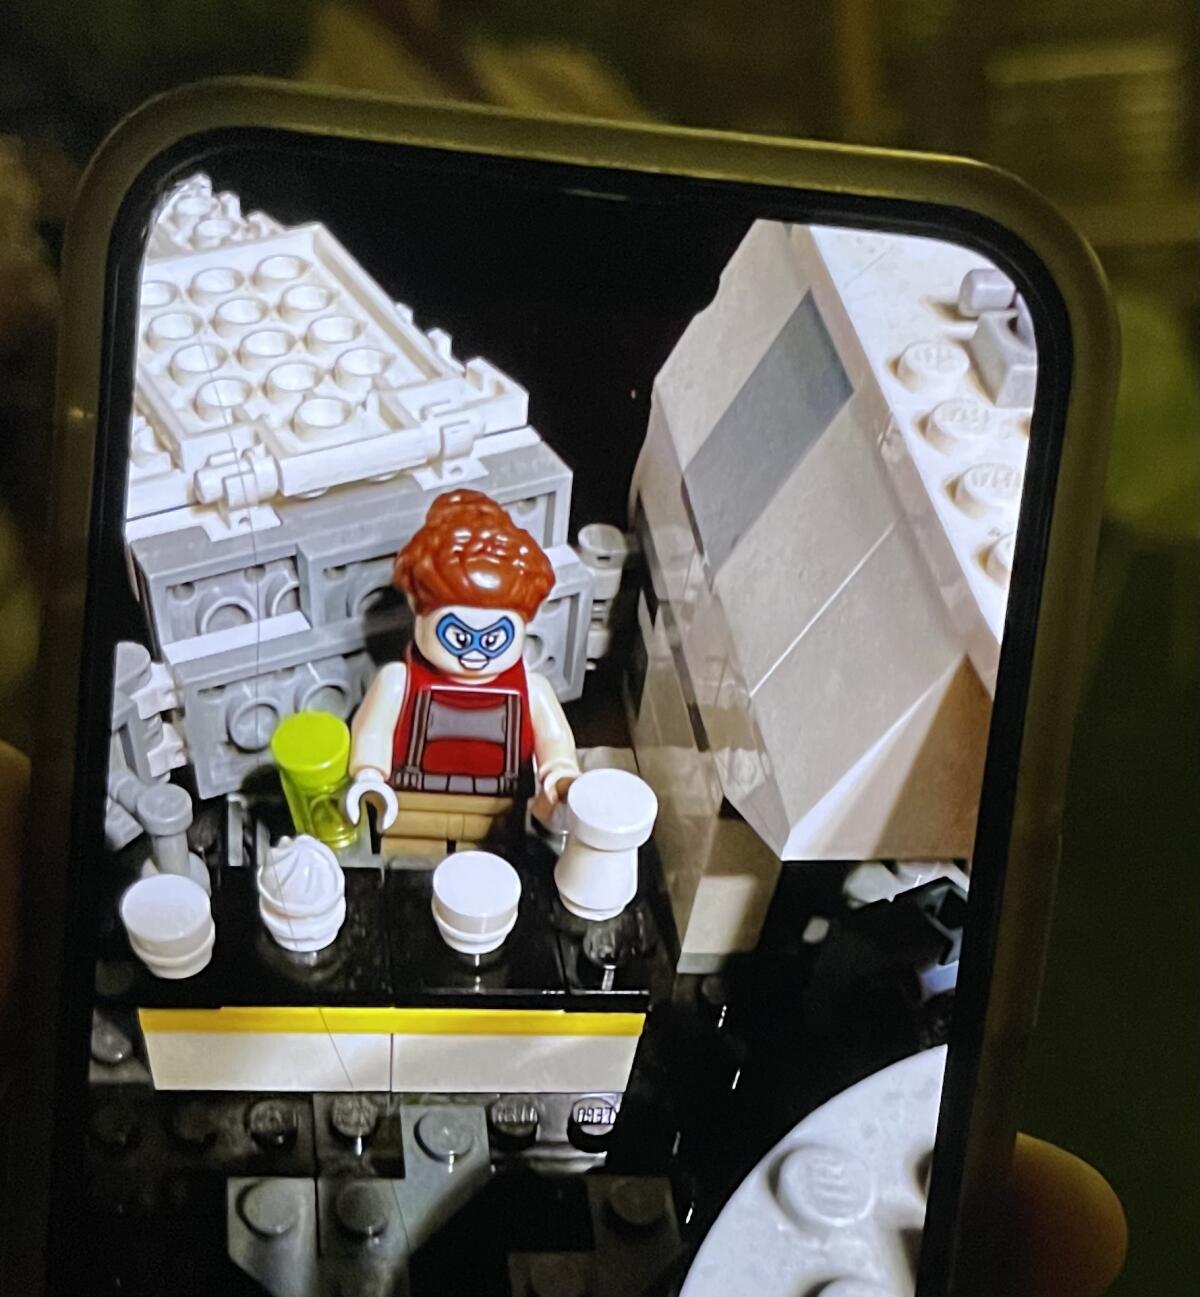 Mozza chef-owner Nancy Silverton rendered in Legos by six-year-old fan Aleister.